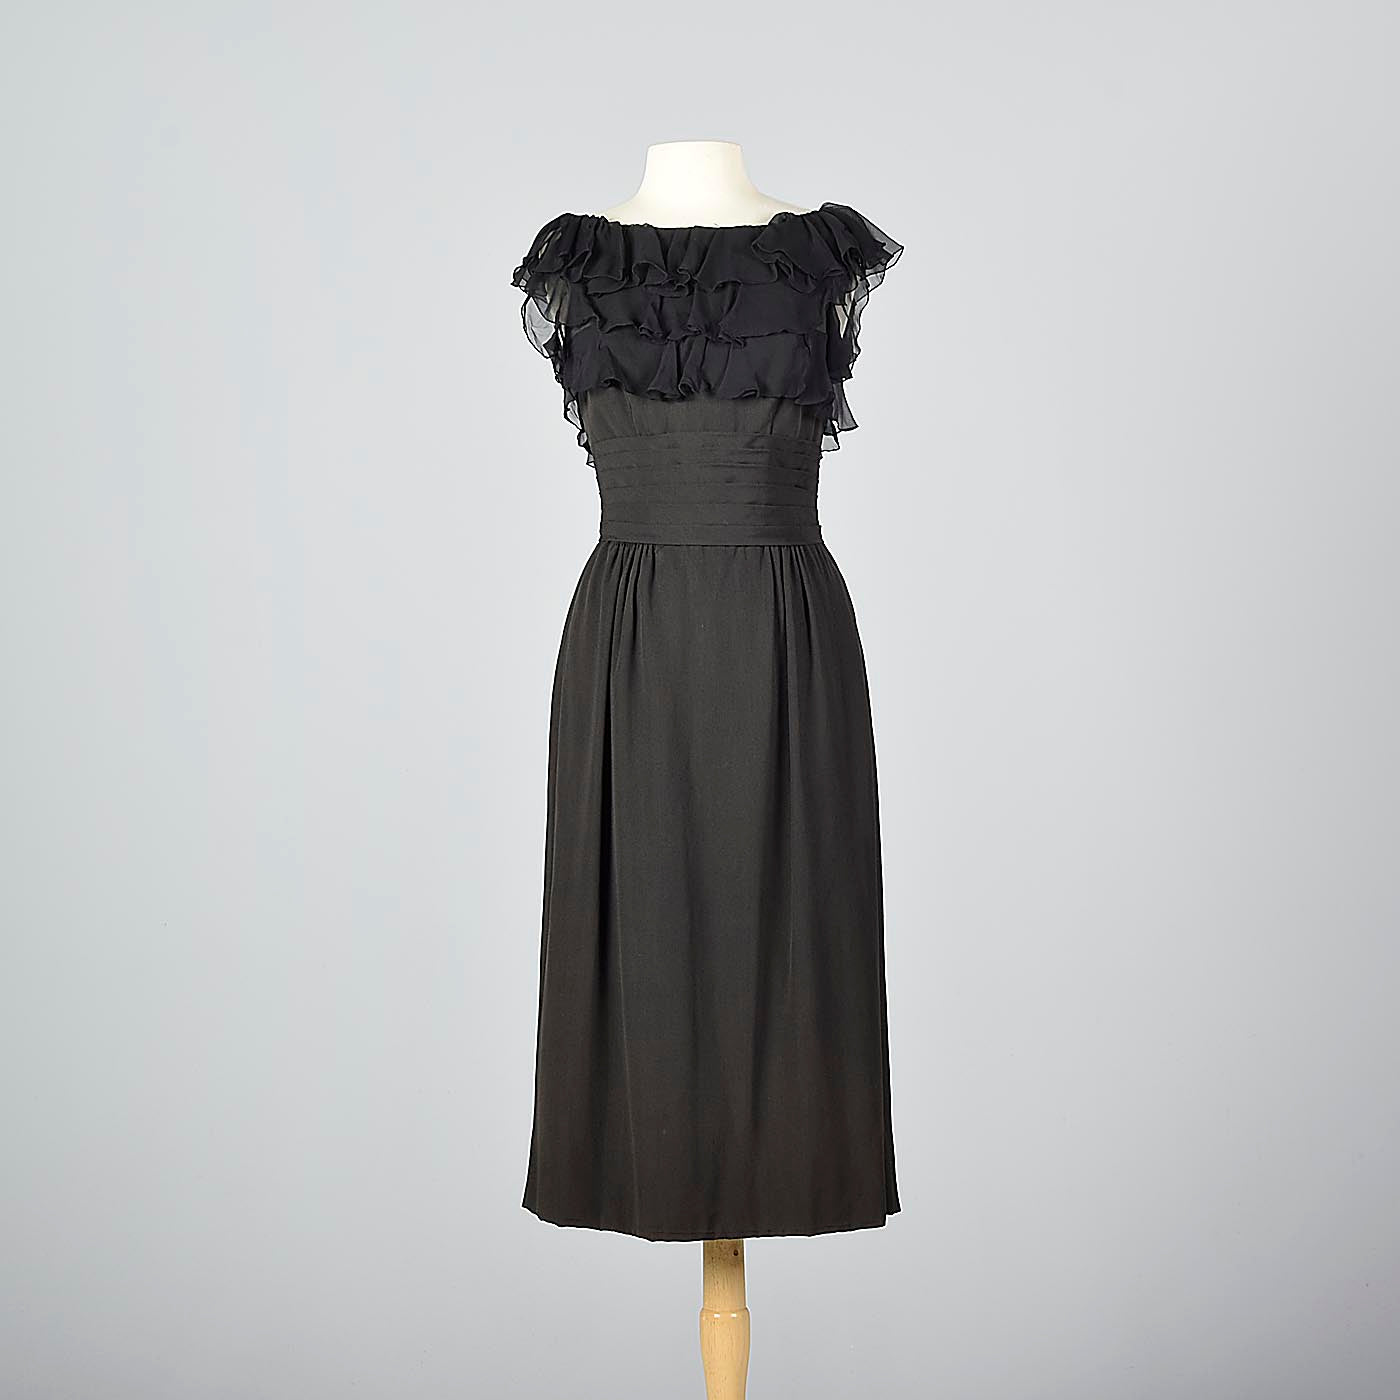 1940s Black Cocktail Dress with Chiffon Bust